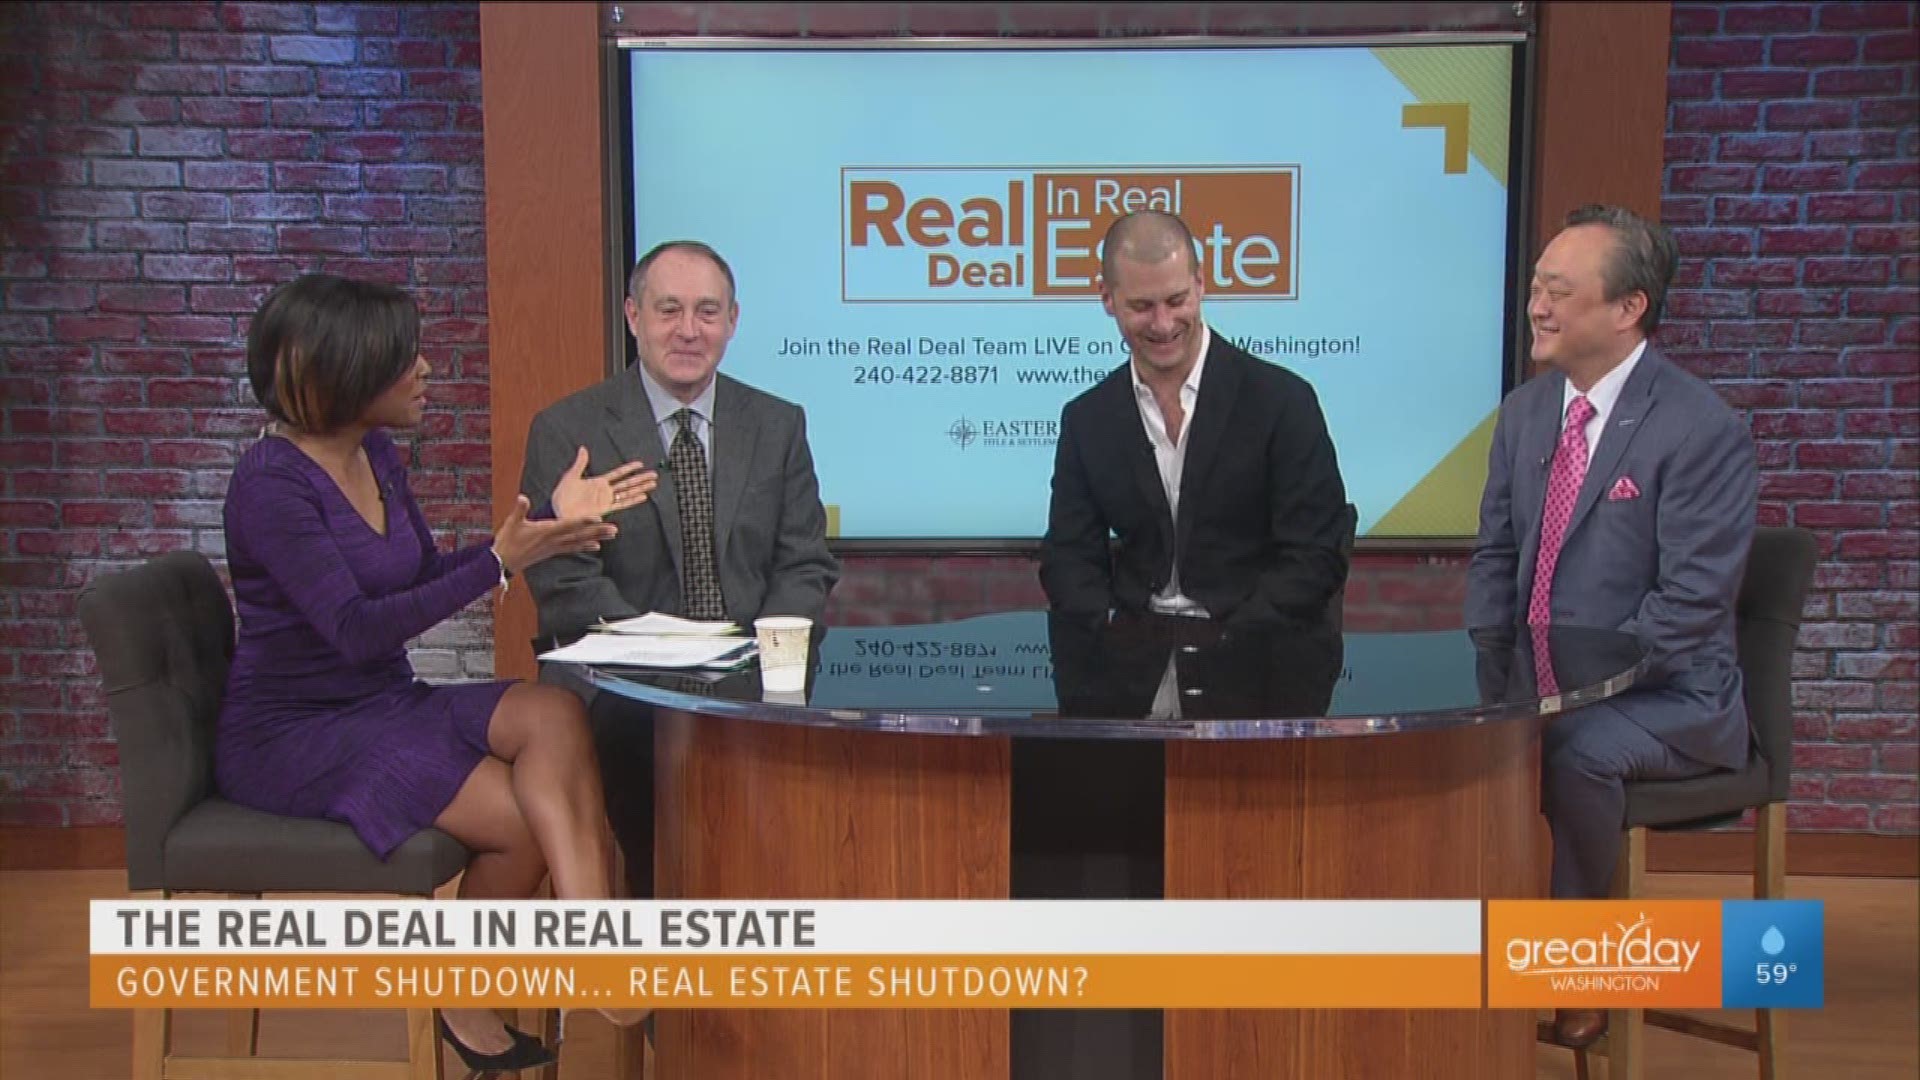 In this edition of The Real Deal in Real Estate, Chong Yi, Josh Ross, and Ben Goldman explain the partial government shutdown's affect on the real estate market. For more information call 240-422-8871 or visit www.therealdealdmv.com.